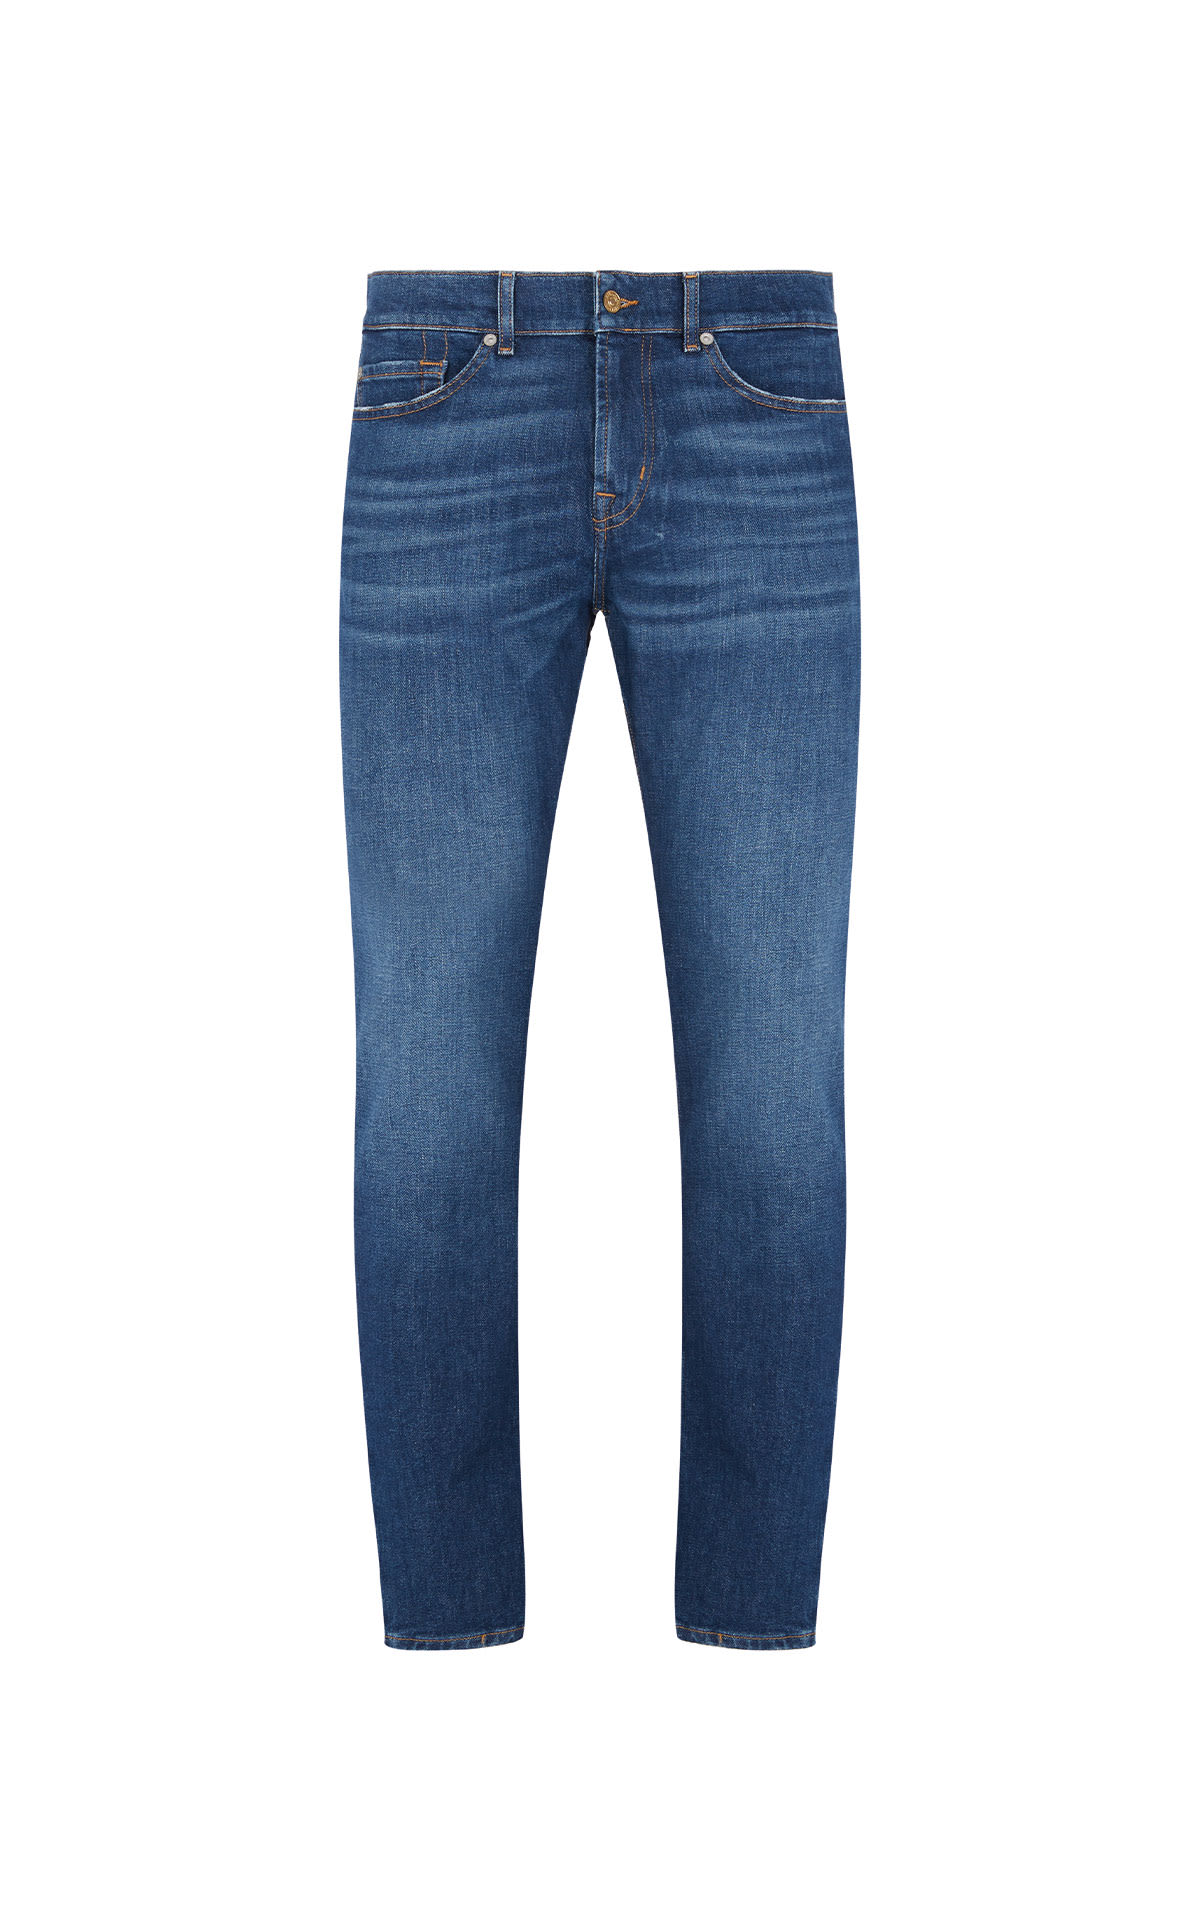 7 For All Mankind Ronnie crux mid blue jeans from Bicester Village